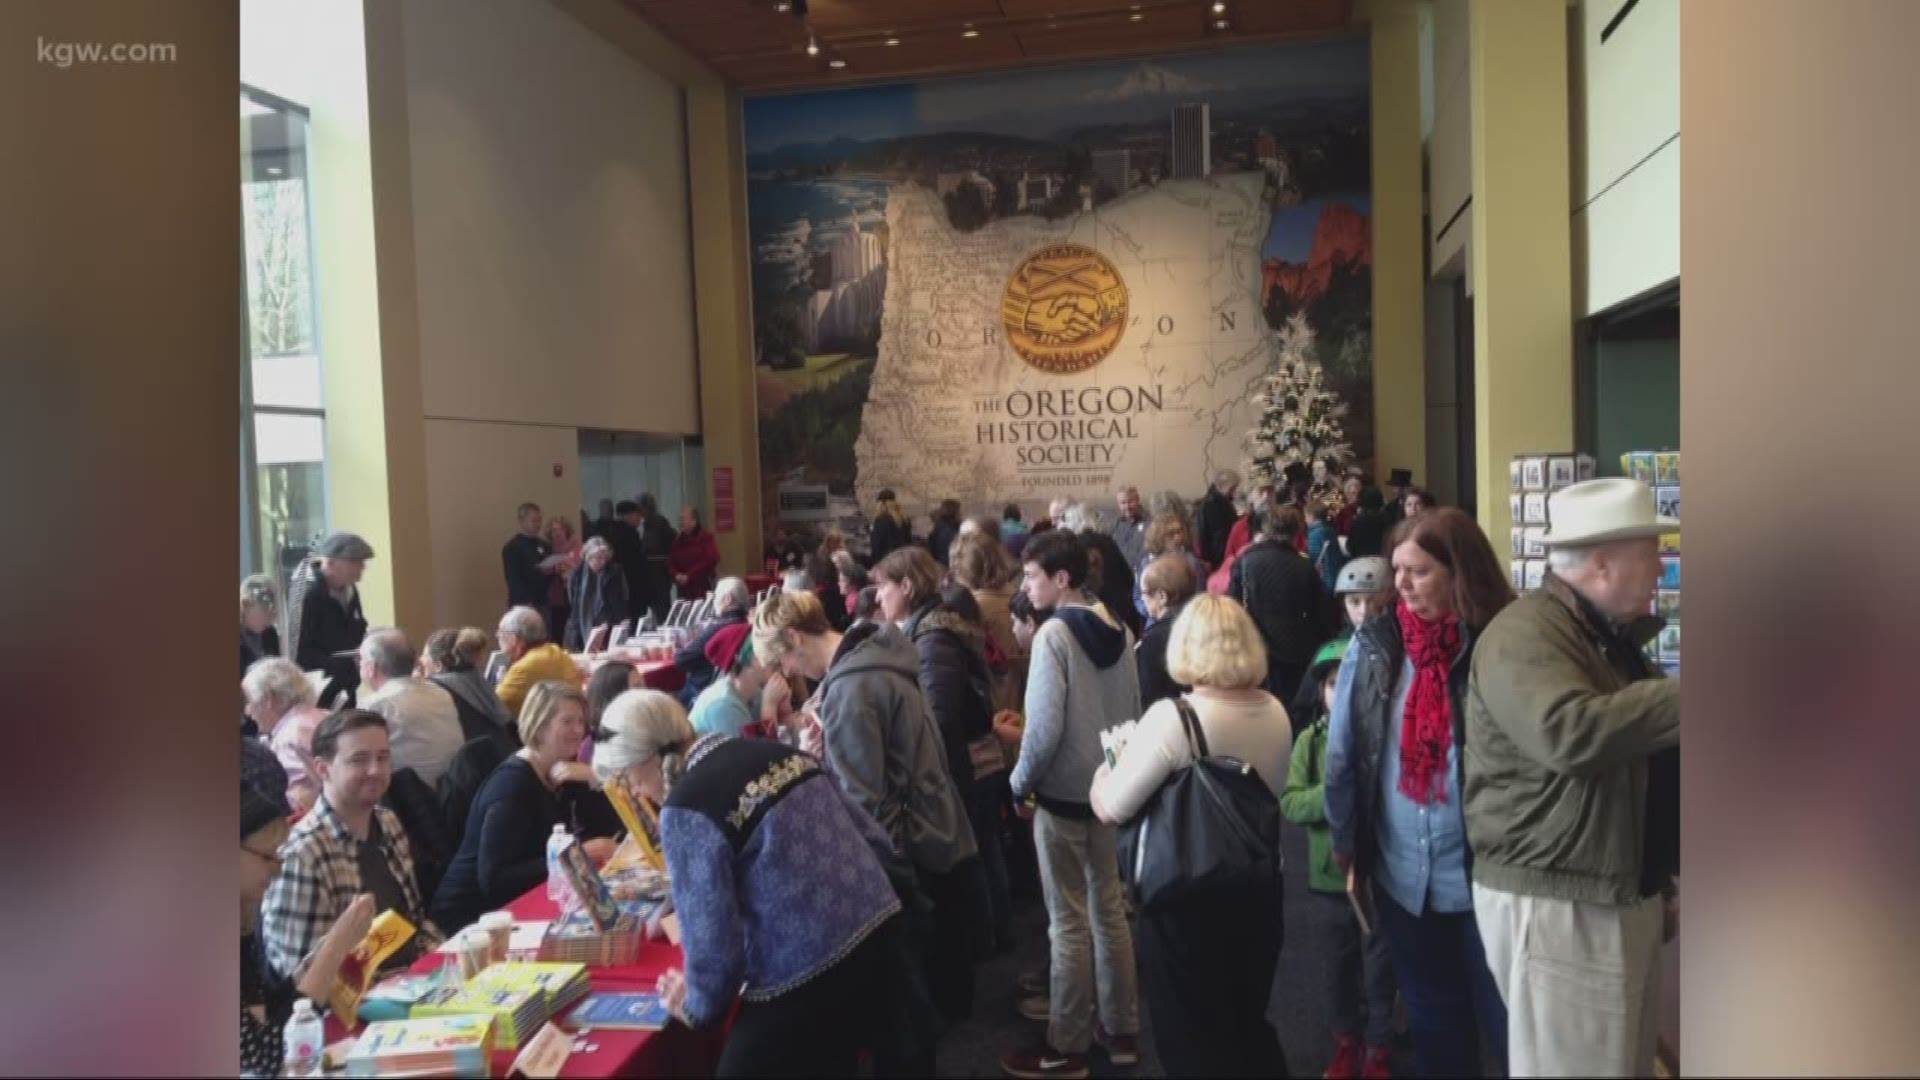 Director Kerry Tymchuk describes free holiday event